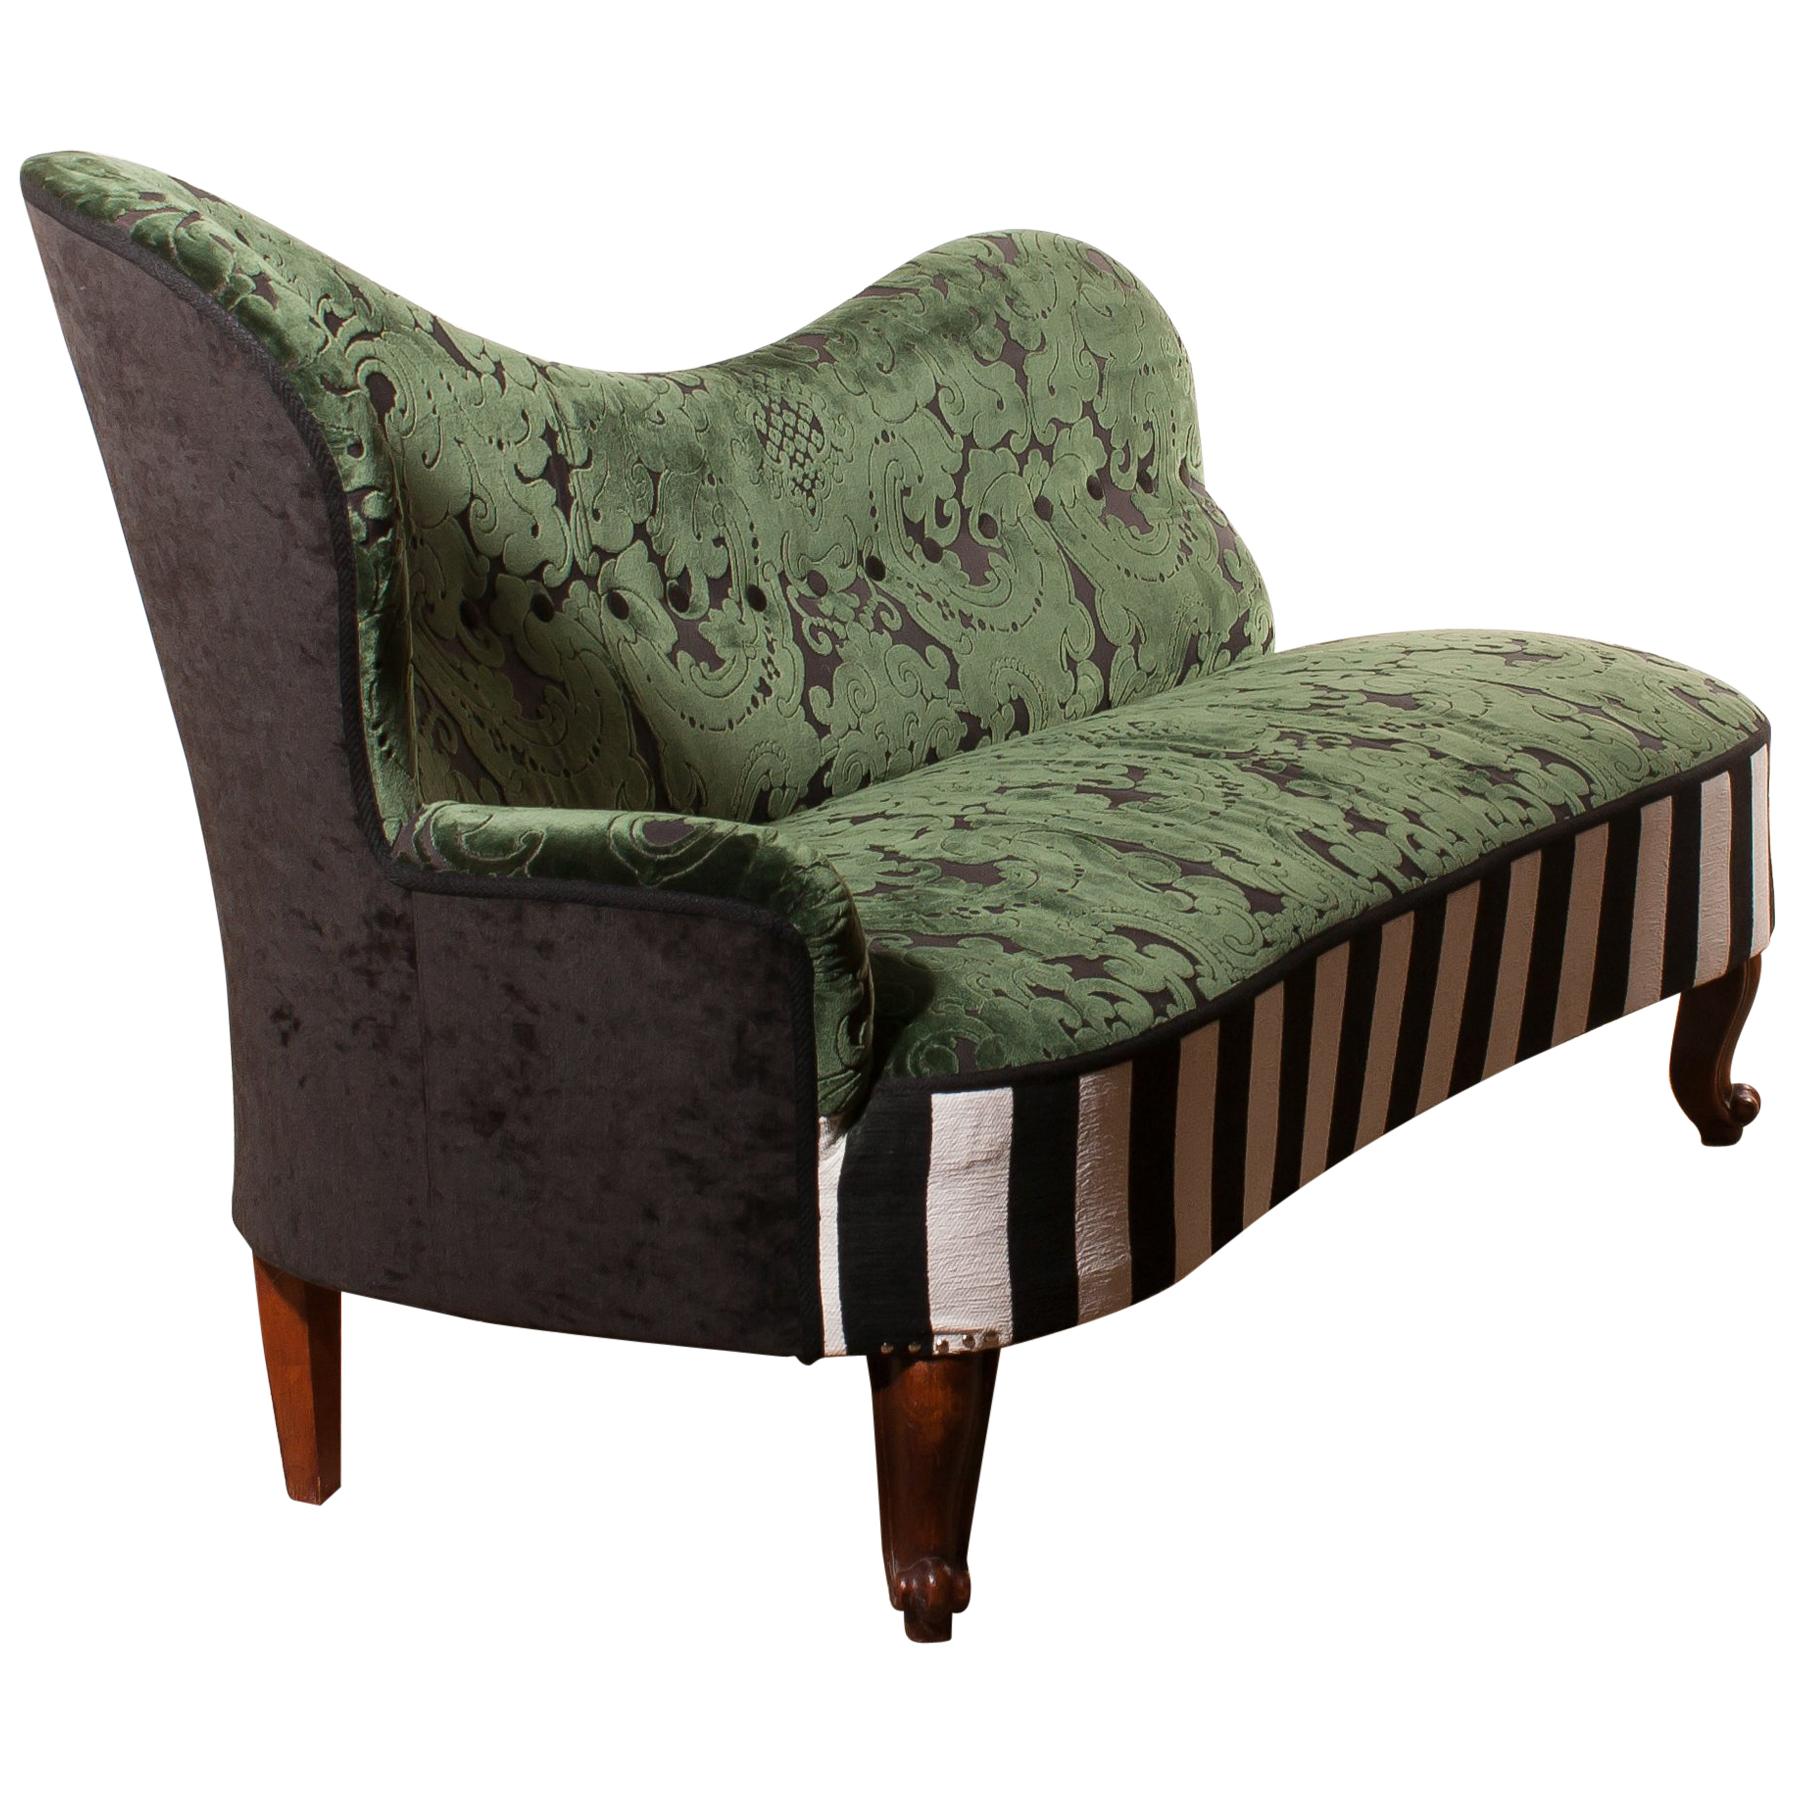 Art Nouveau 1950s Green Jacquard Velvet and Velours Piano Stripe Sofa or Chaise Lounge